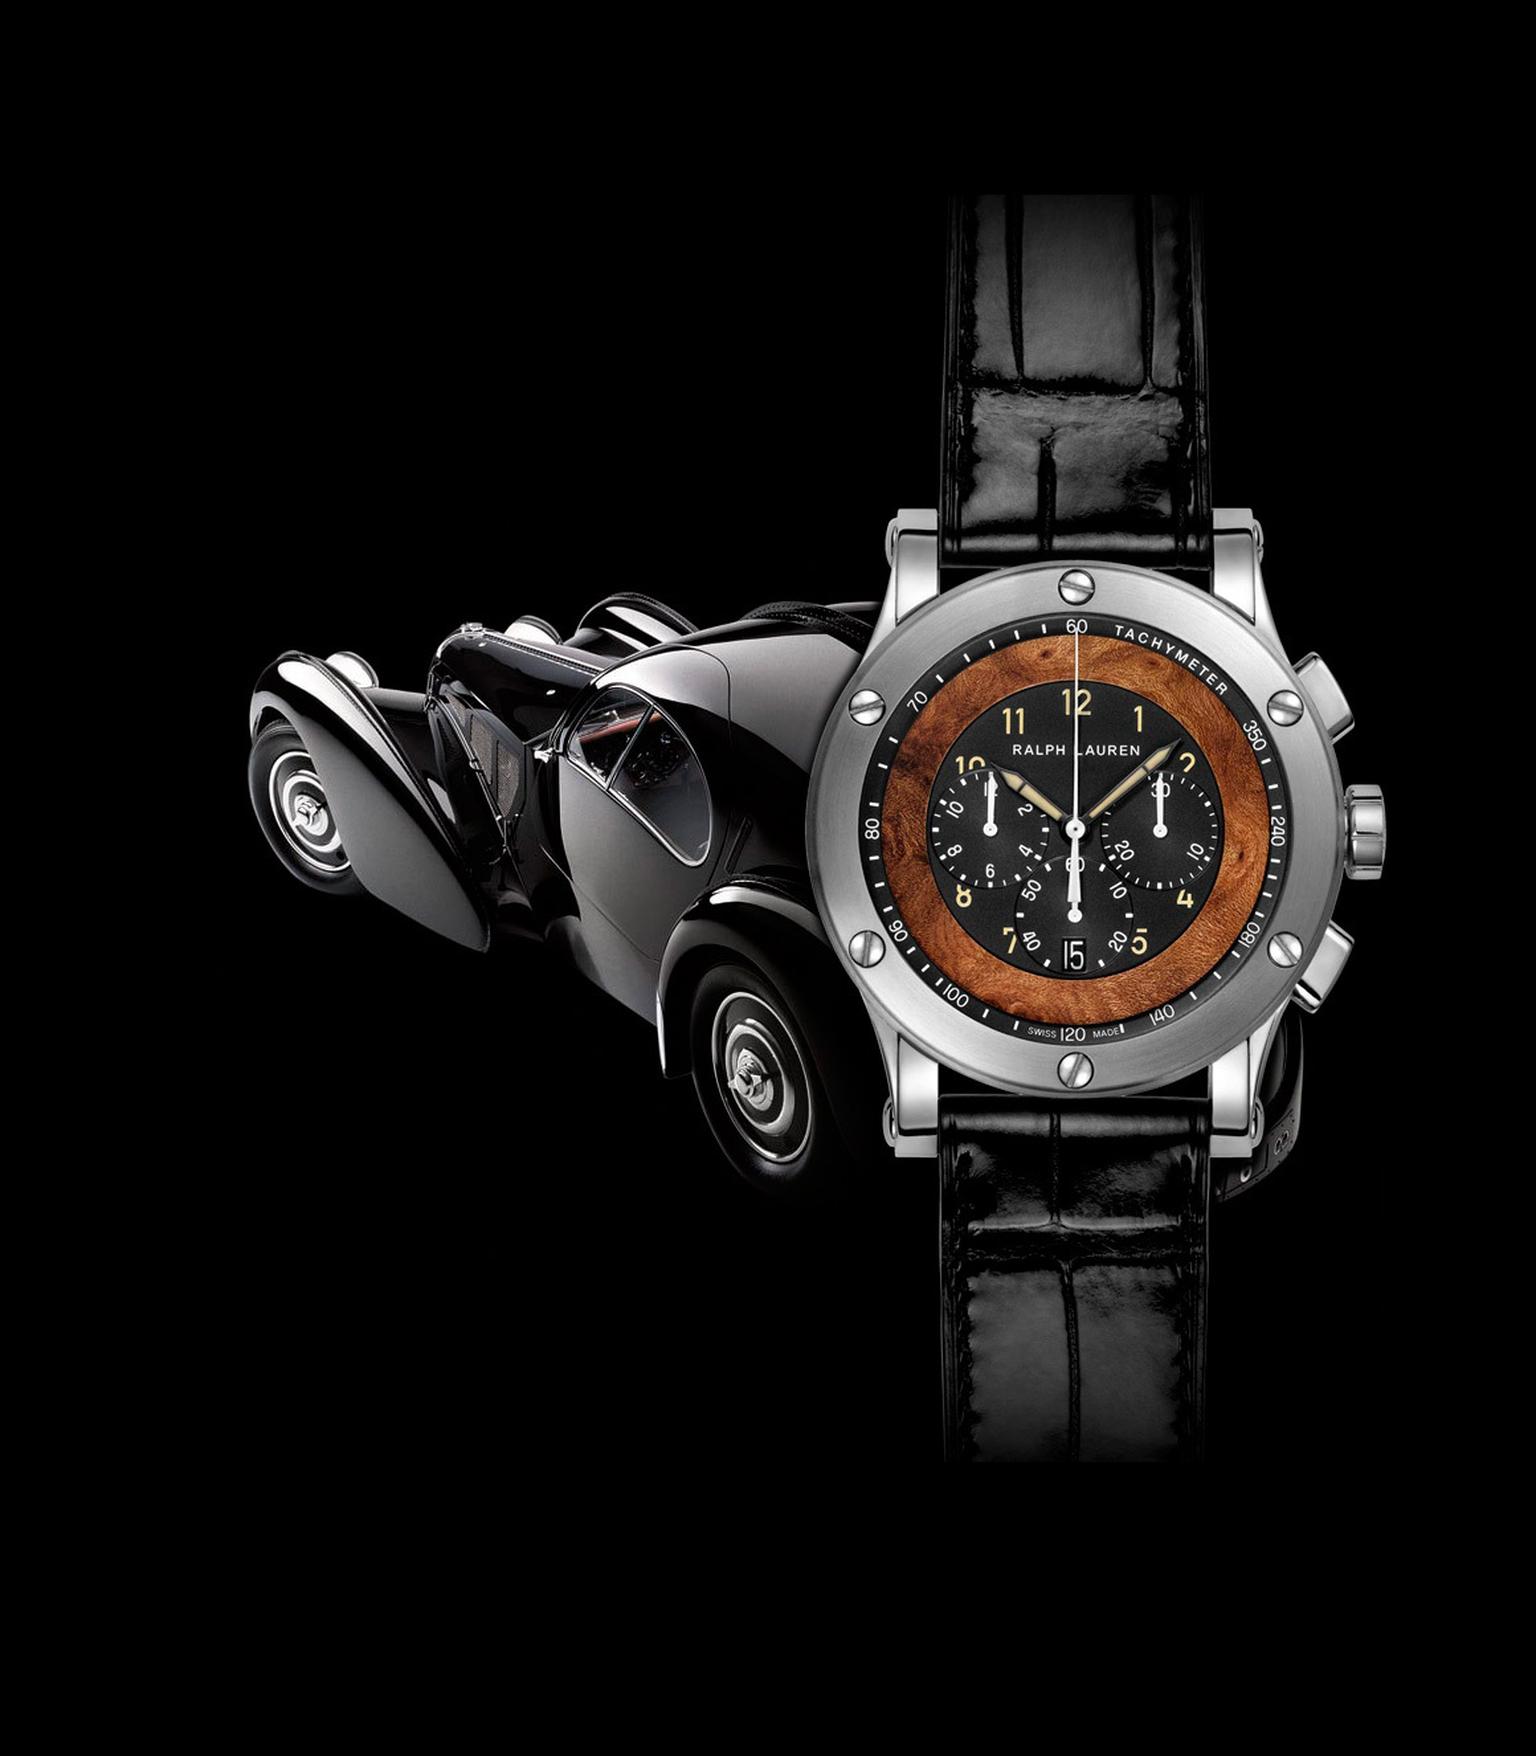 The Ralph Lauren Sporting watch collection has just welcomed a new thoroughbred to its stable with a racy chronograph model that bridges the designer’s love of cars and watches.